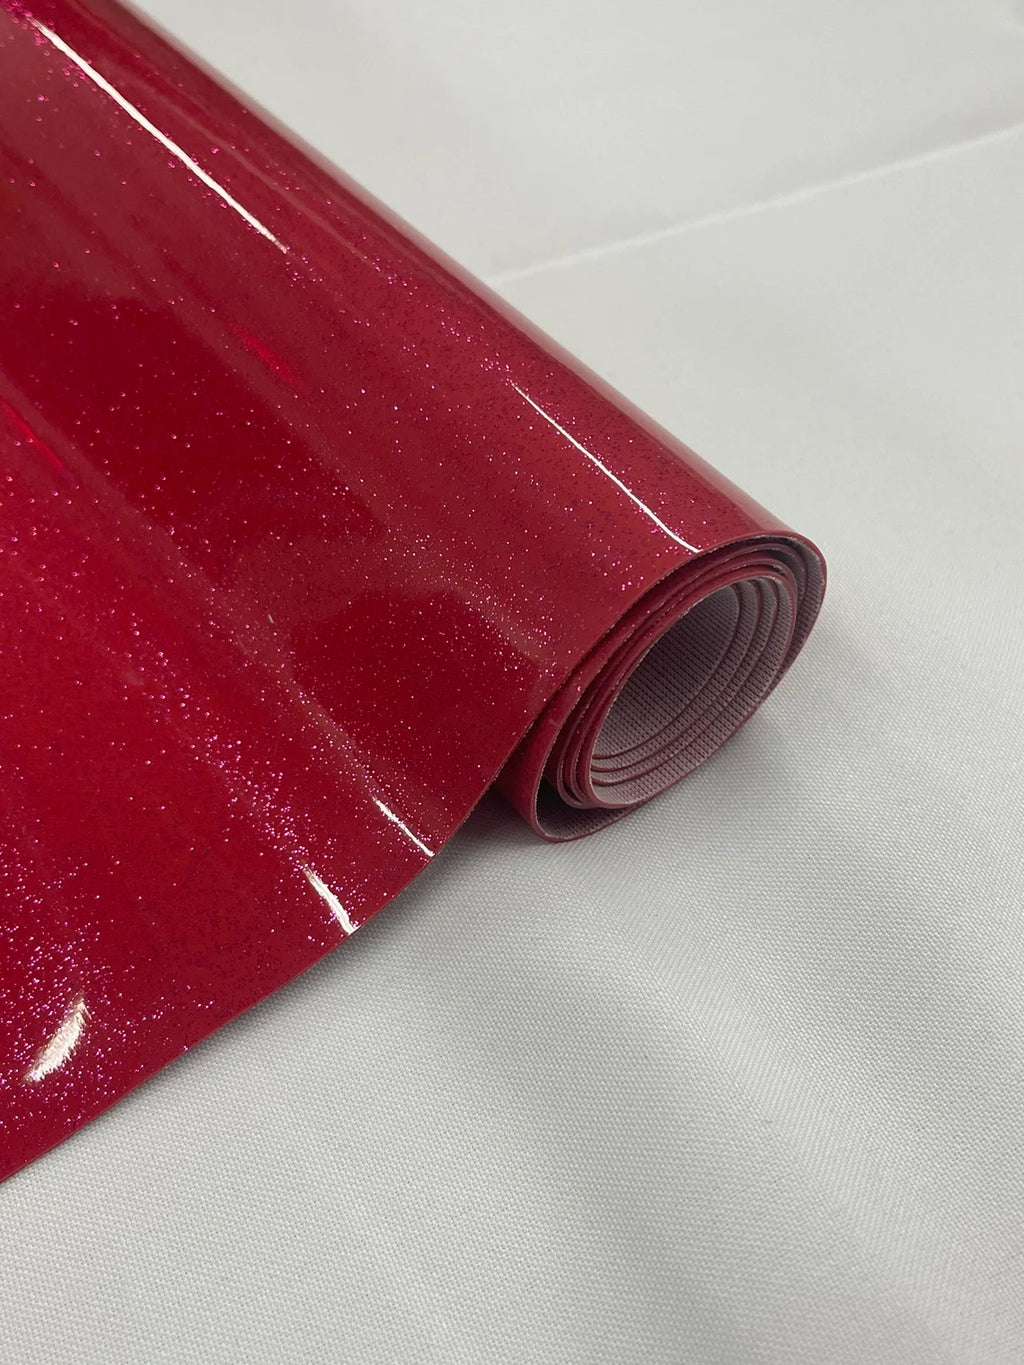 Maroon Red High Gloss Glitter + Sparkle Vinyl Upholstery Fabric By